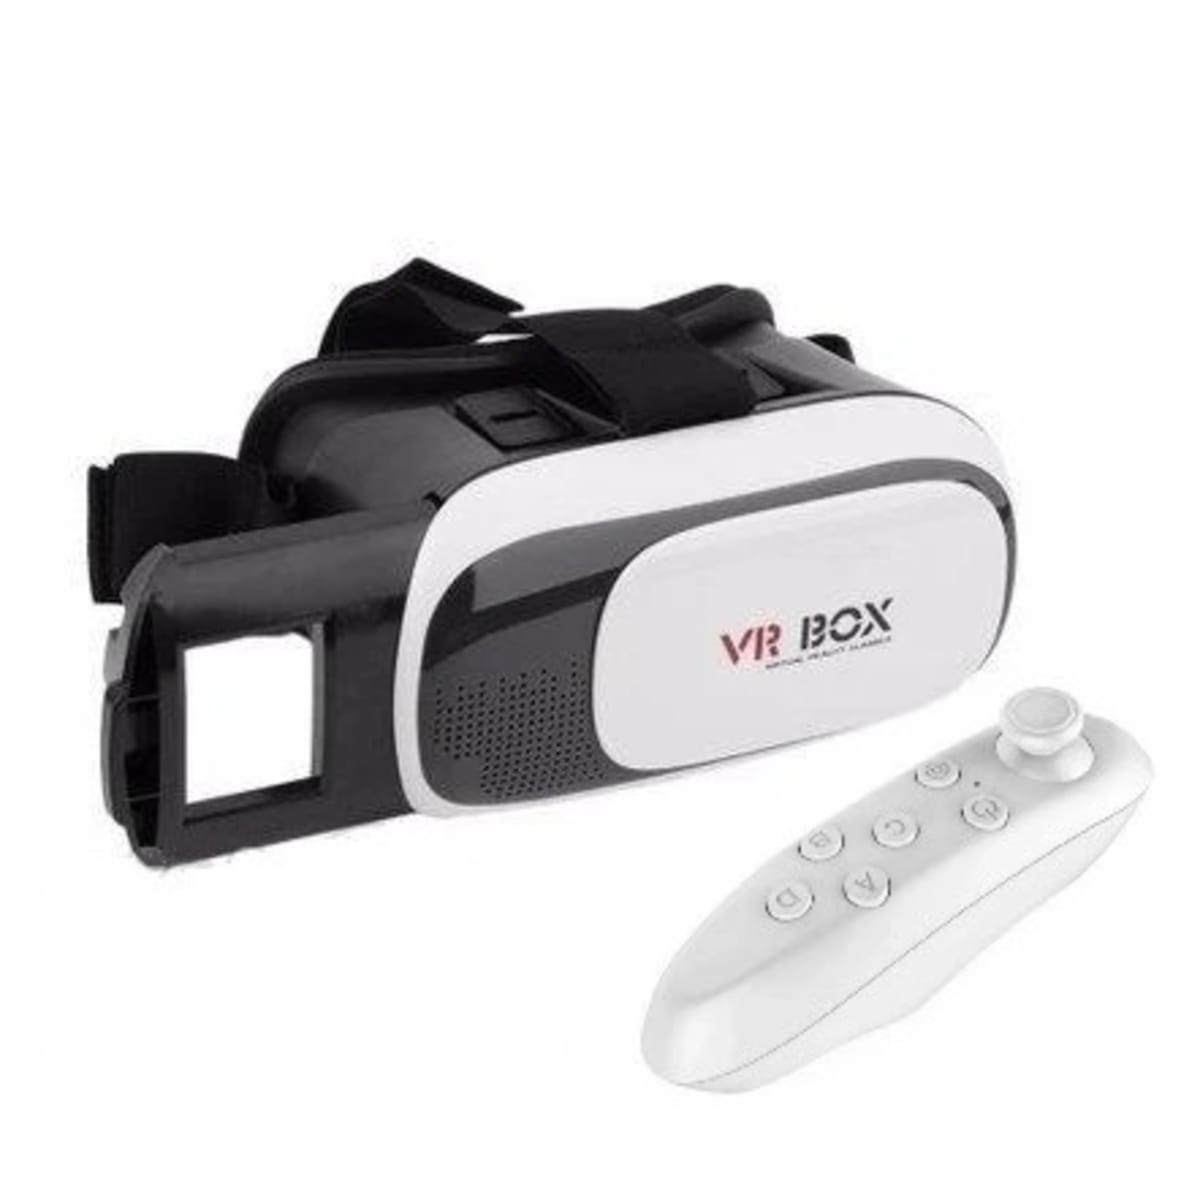 andy bulmer recommends vr box movies online pic